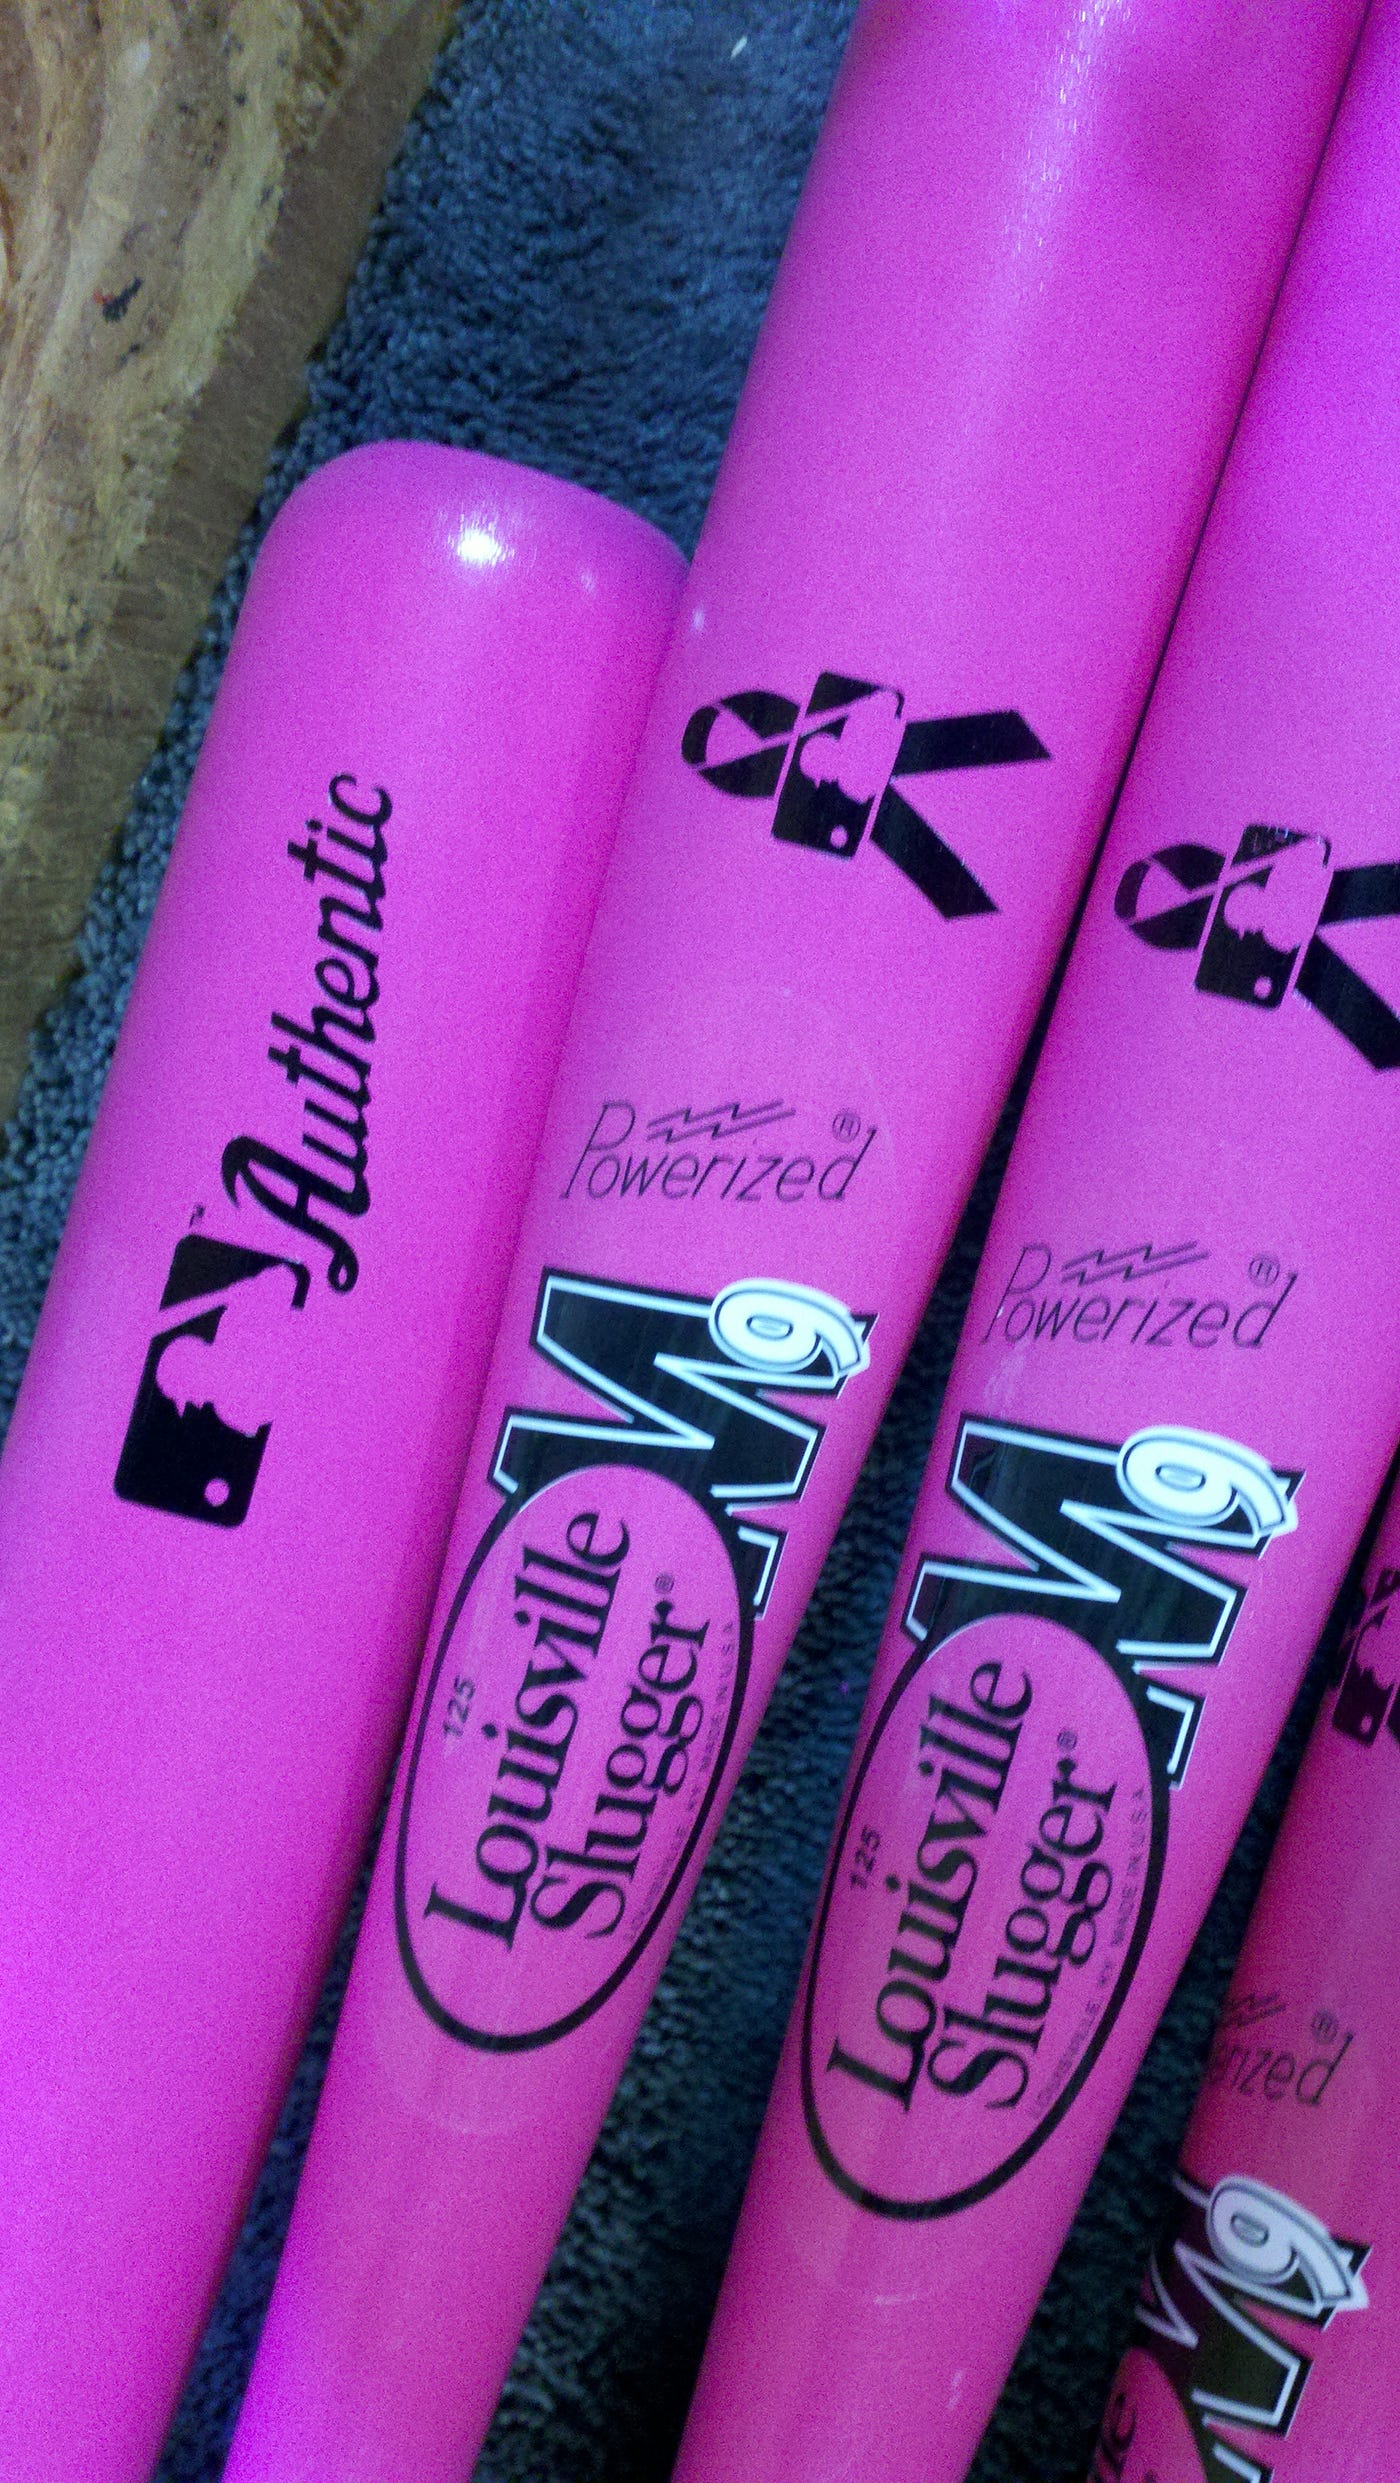 Going to Bat” Against Breast Cancer